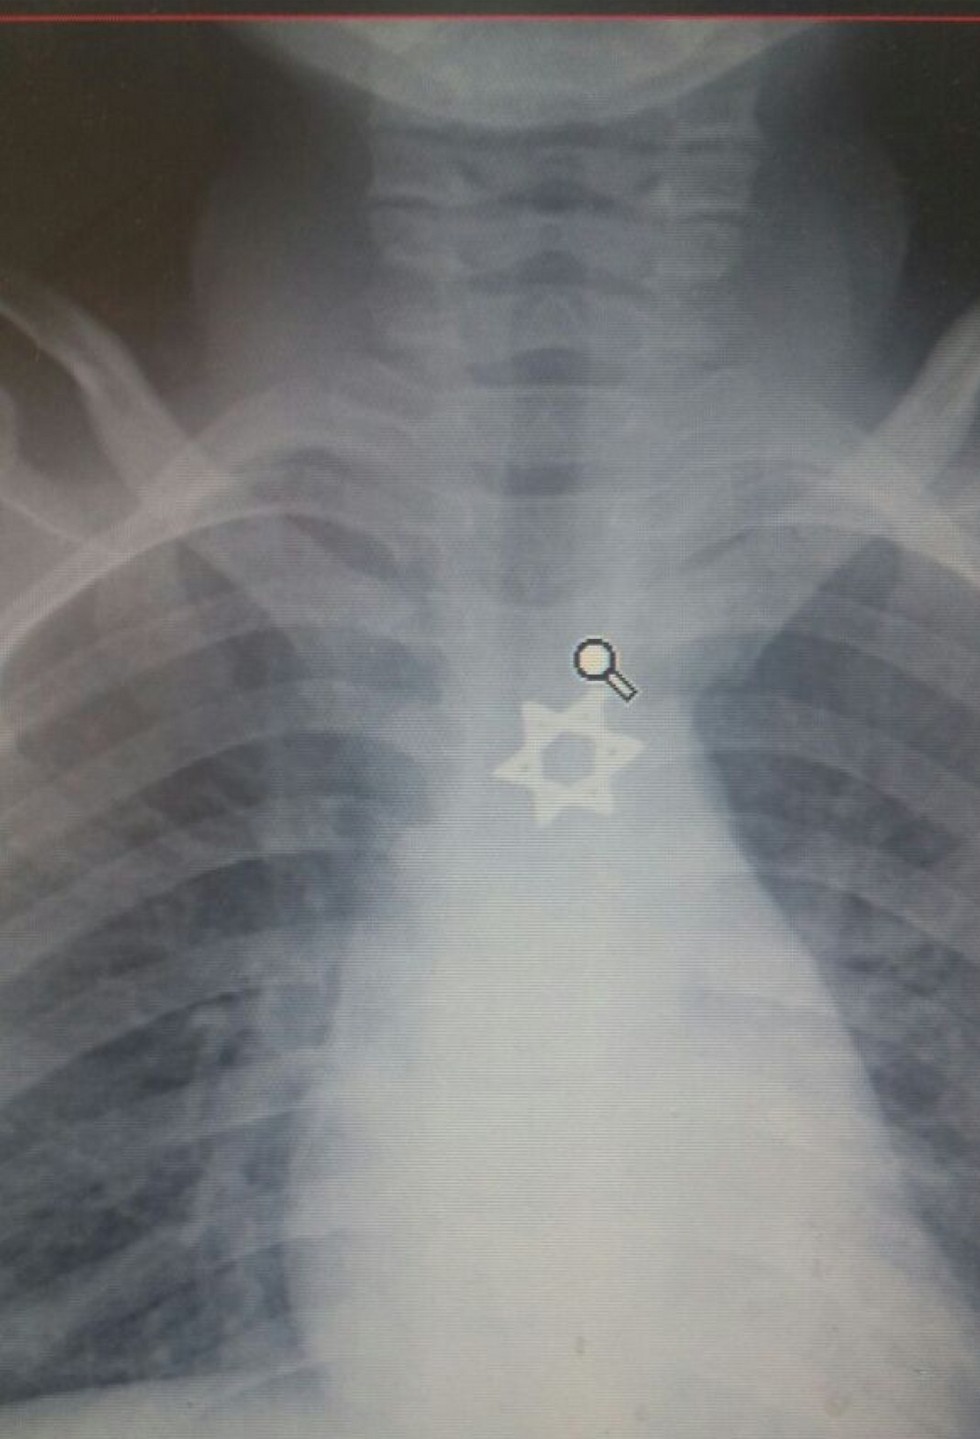 Boy named Daud swallows Star of David, saved by doctors